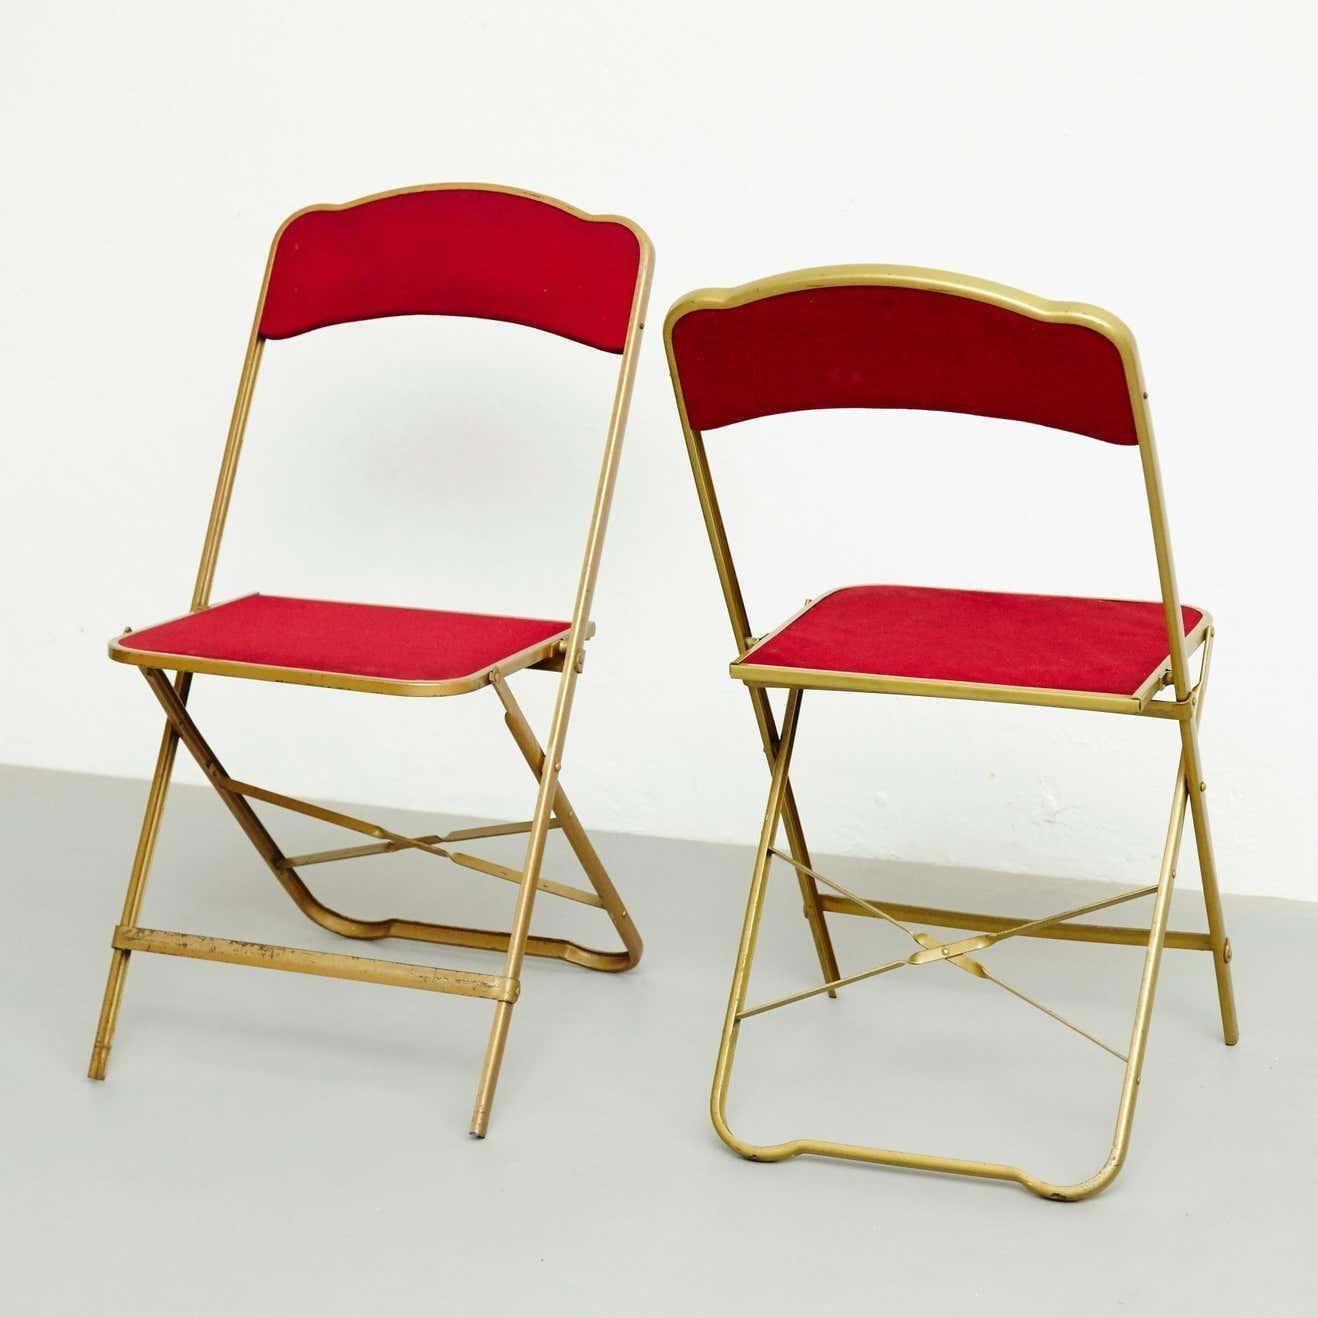 Pair of Antique French Folding Theater Chairs, circa 1960 For Sale 4